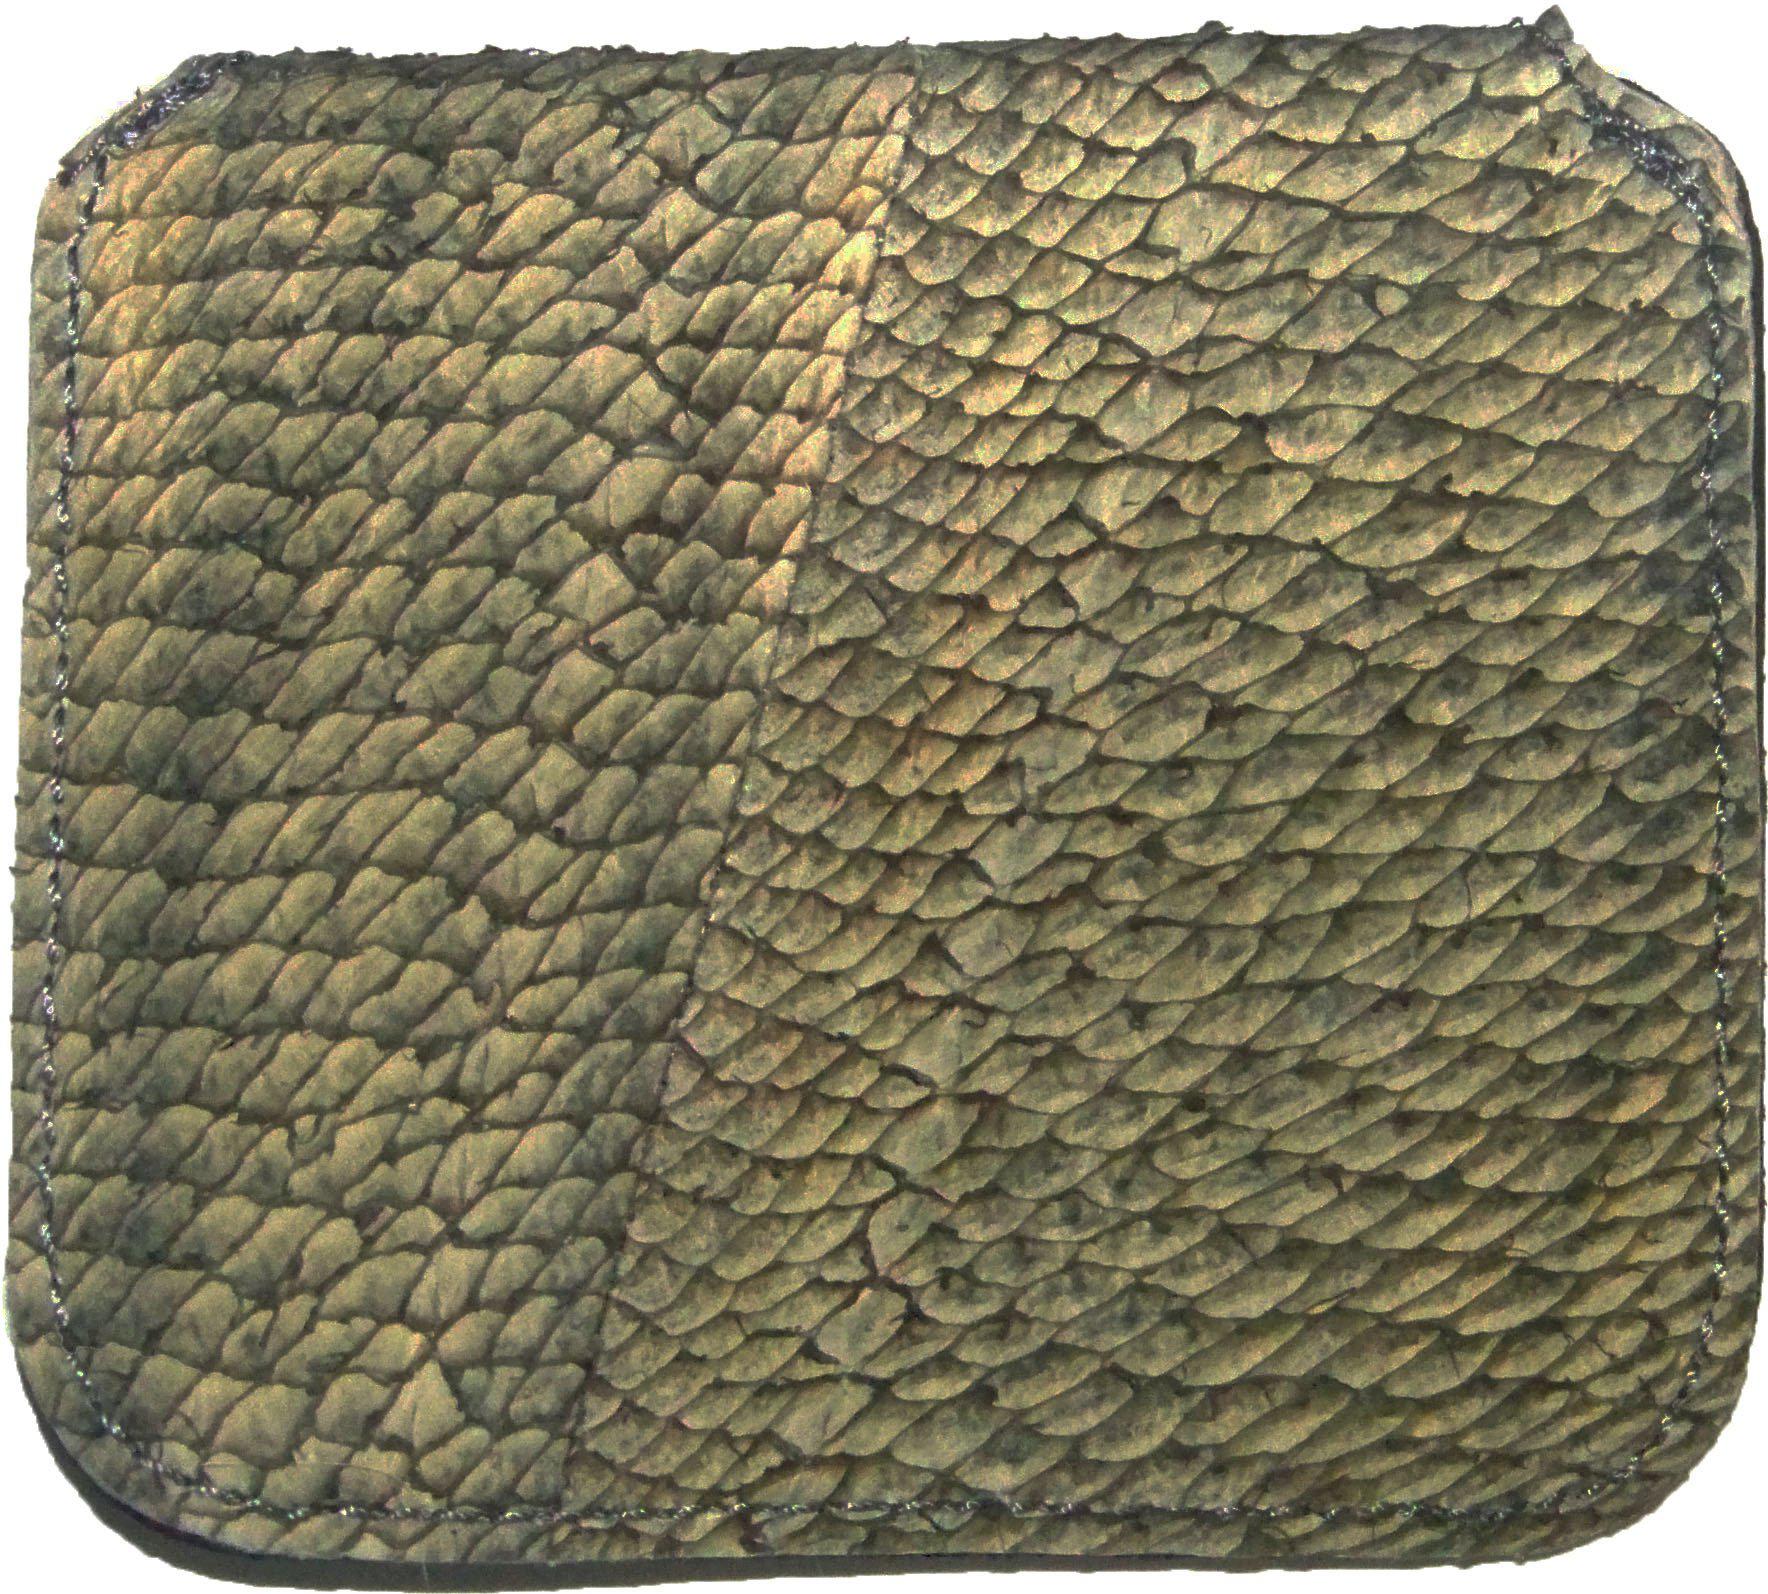 True Walleye Fish Leather Change Purse - Critter Country Supply Ltd.